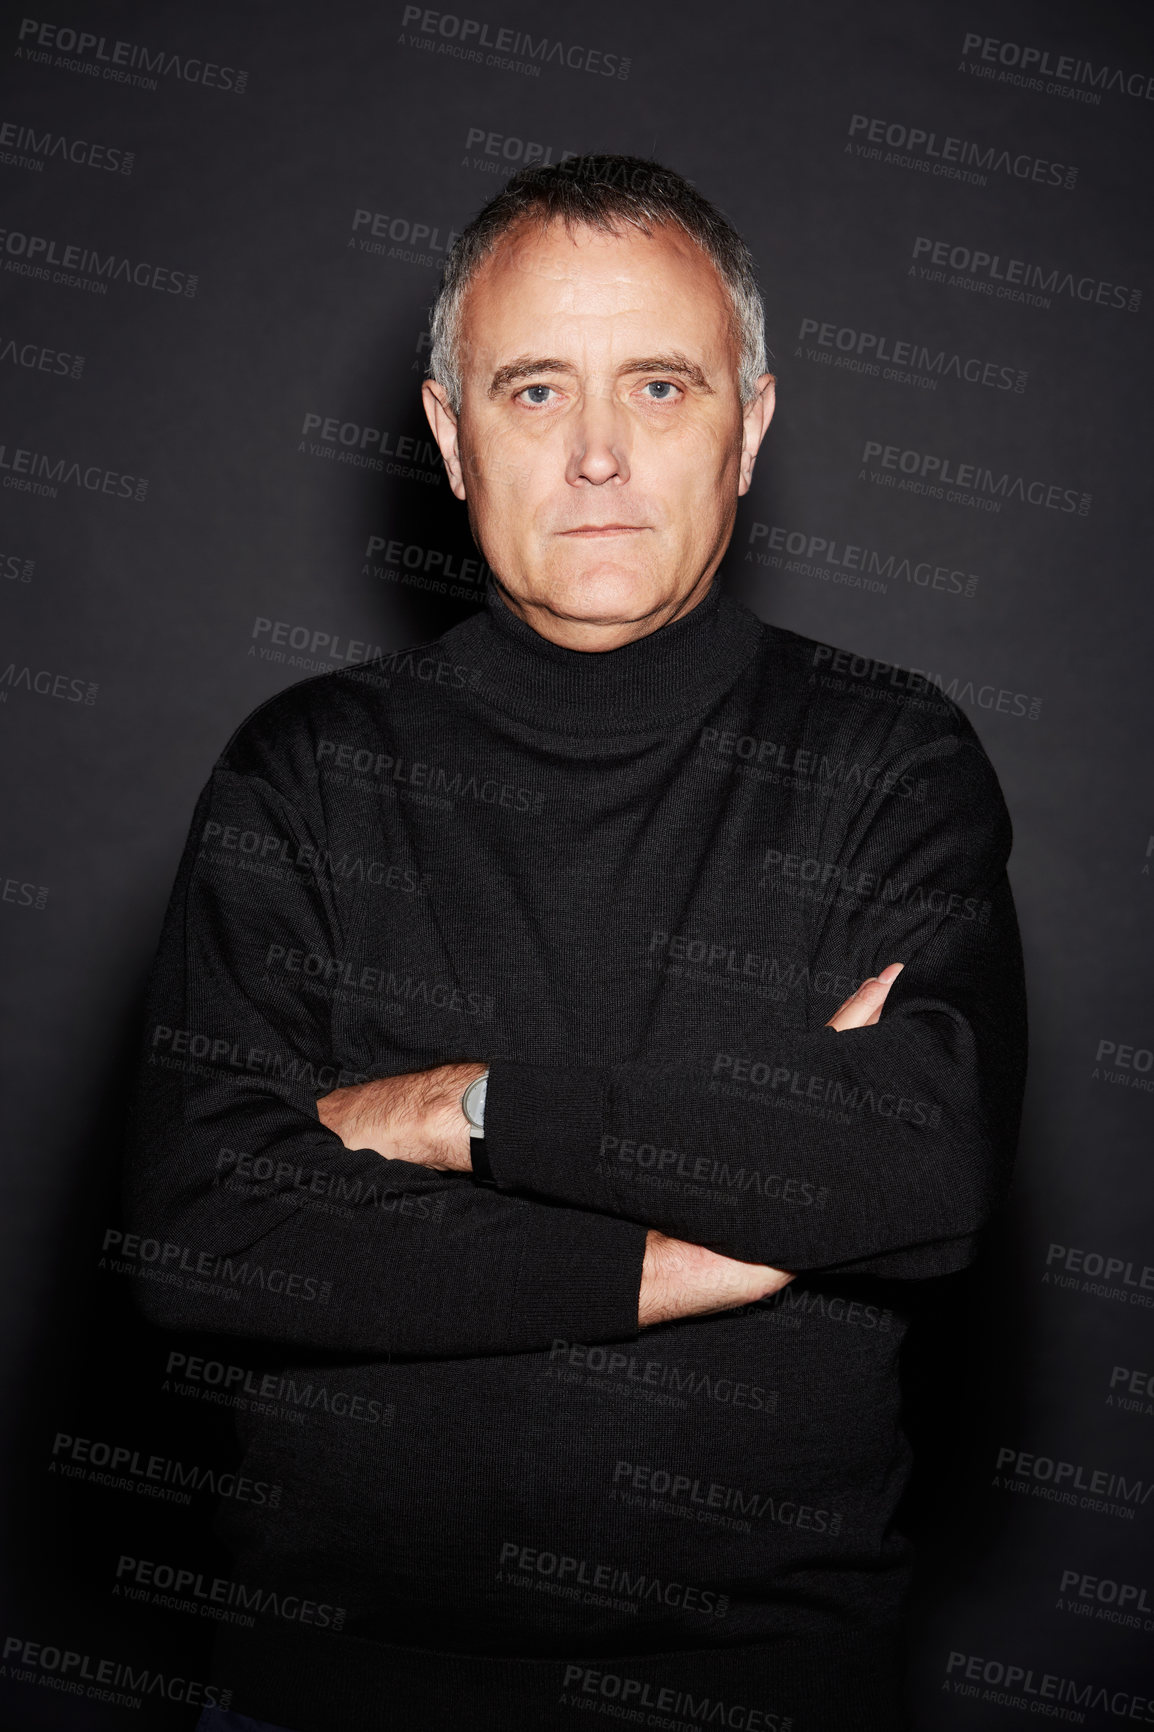 Buy stock photo Studio portrait of a mature man isolated on black